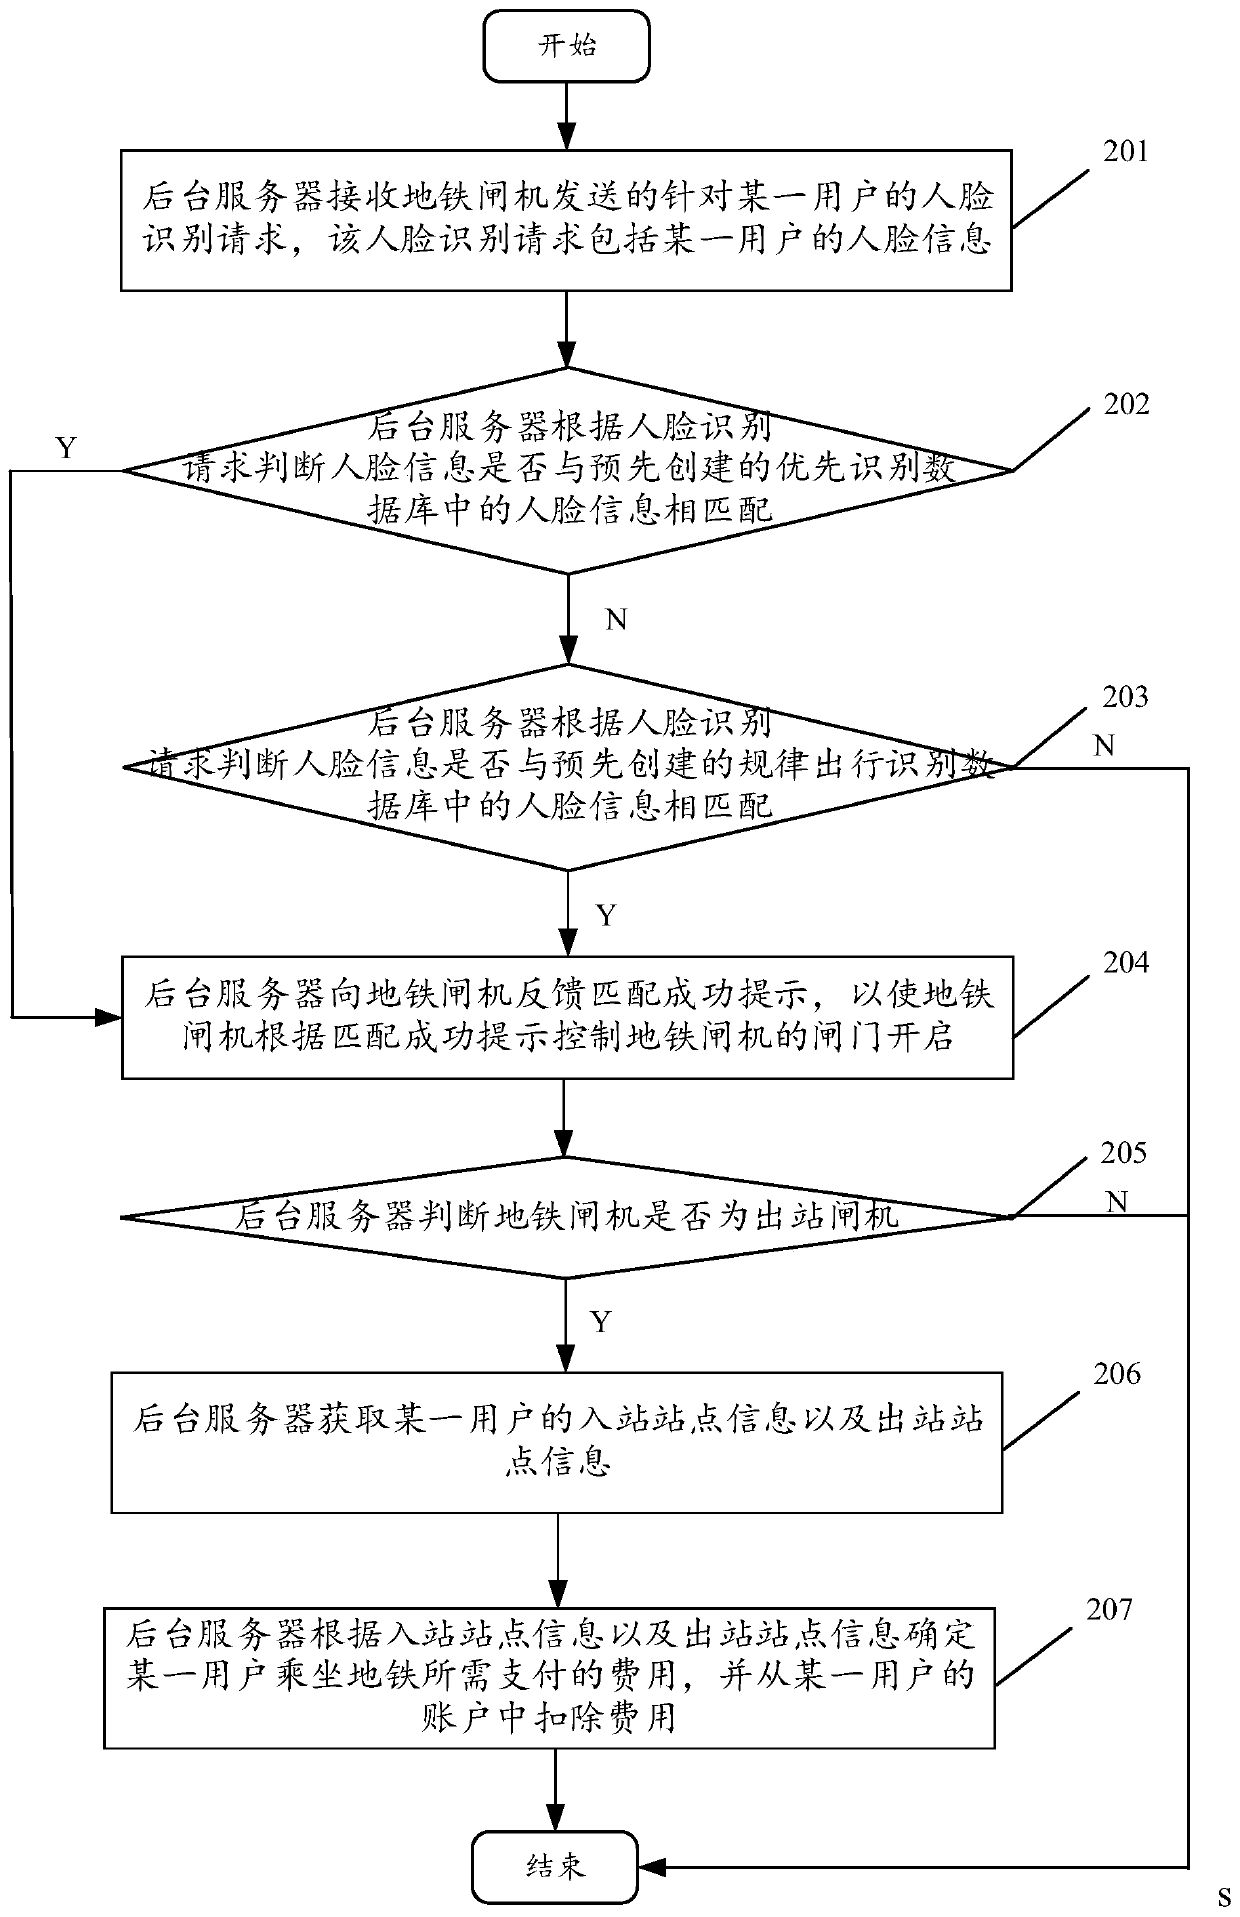 Control method and device based on subway face-scanning authentication